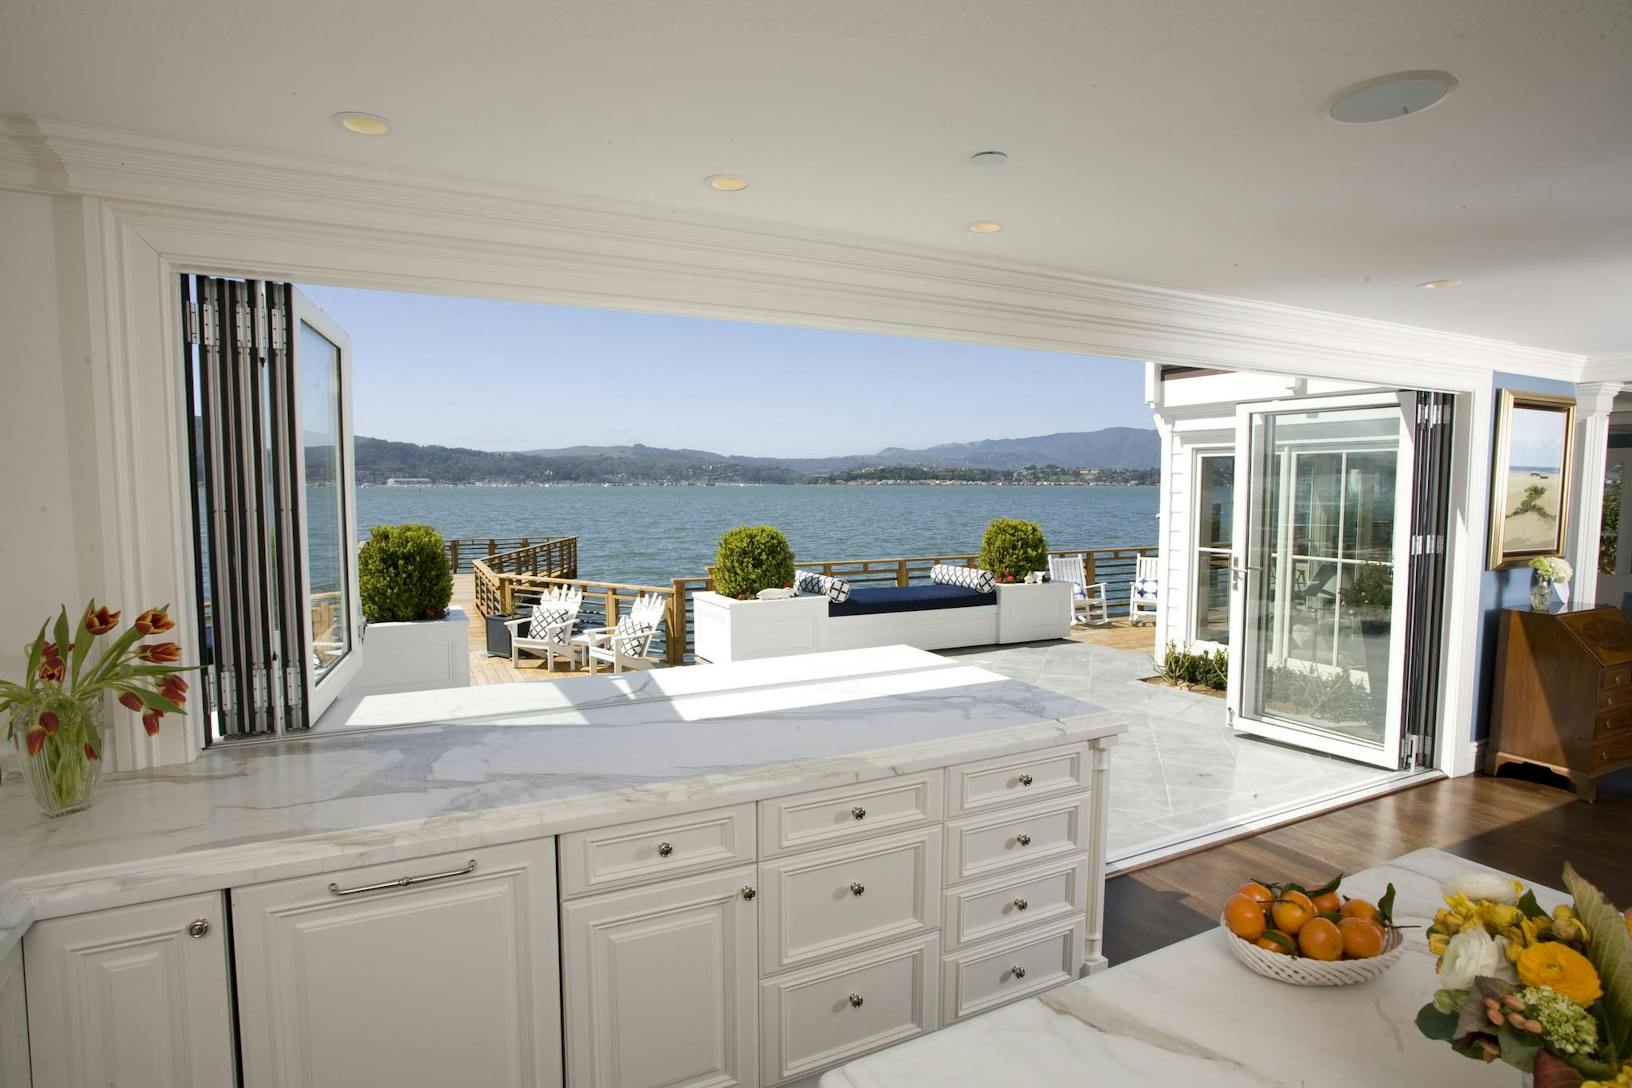 Kitchen Window Doors Combination Design with View of the Mountains around the Bay - NW Wood 540